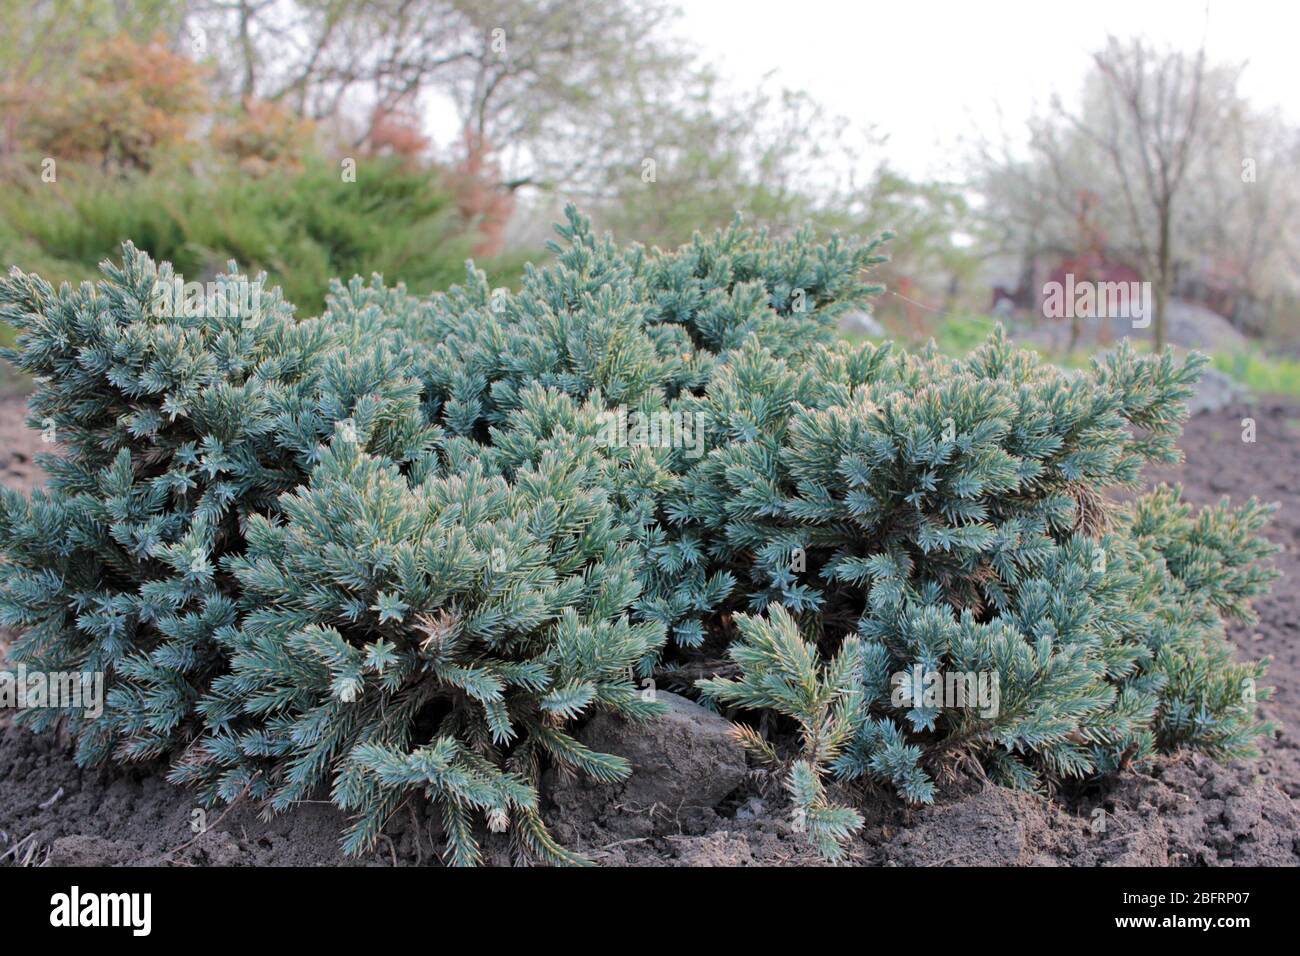 Blue Star Juniper Plant also known as Himalayan juniper. Needled evergreen shrub with silvery-blue, densely-packed foliage in the garden. Stock Photo